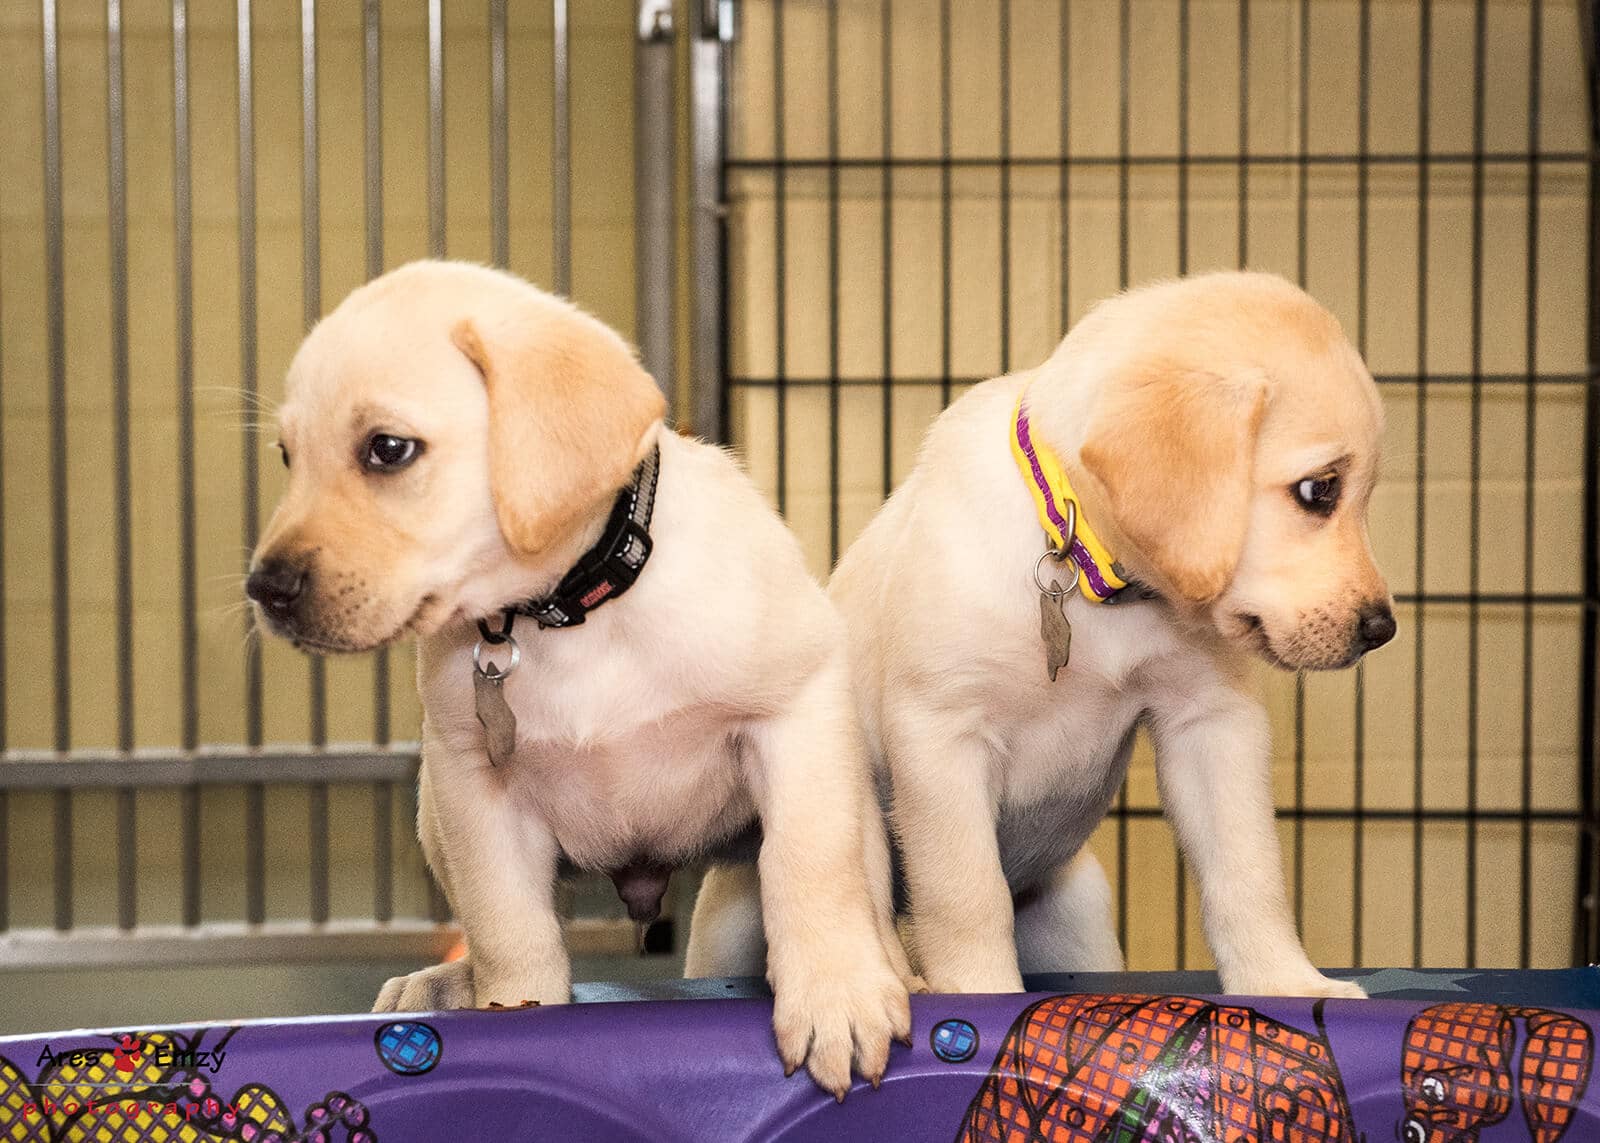 The image shows two cute baby puppies in the nursery. These yellow lab pups are investigating a baby pool.